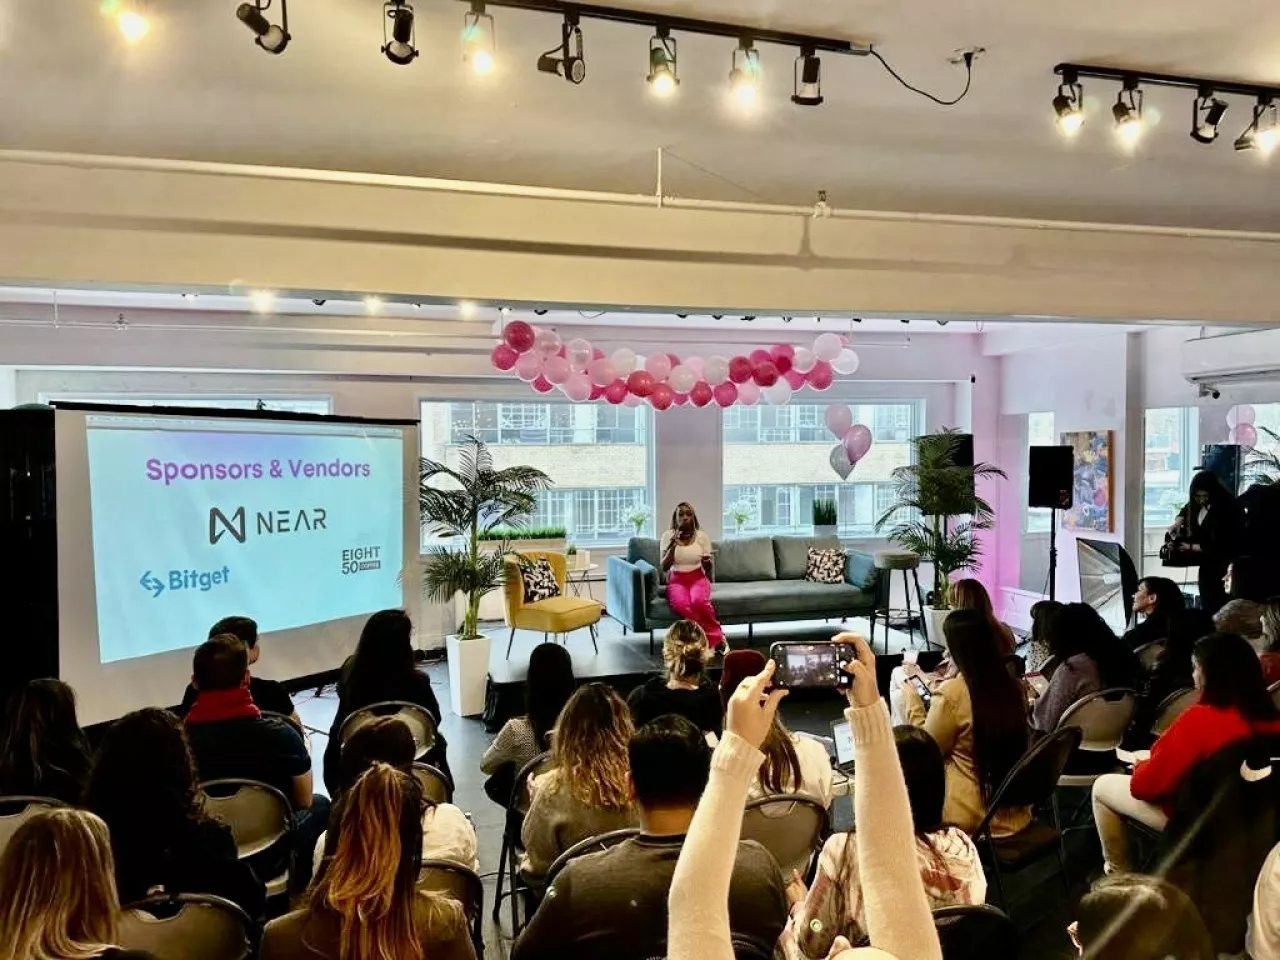 Crypto Babes Co-Founder Ashley Wright gives an Opening speech at the Crypto Babes Educational Event (CNW Group/Bitget Limited) img#1